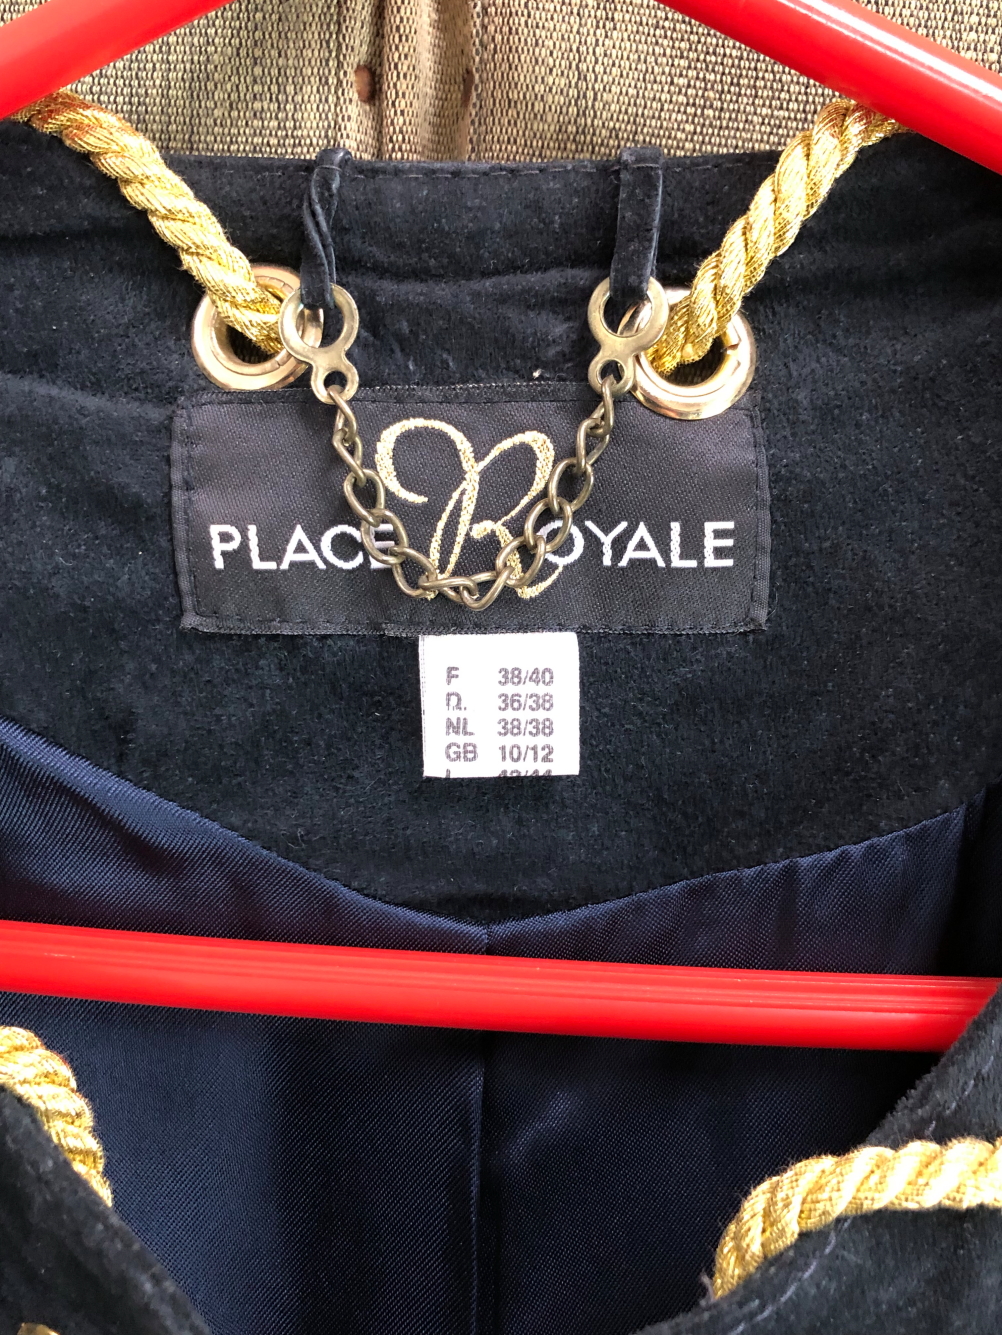 A DARK BLUE PLACE ROYALE SUEDE SHORT JACKET WITH GOLD STAR ROPE DETAIL GB 10/12 - Image 2 of 4